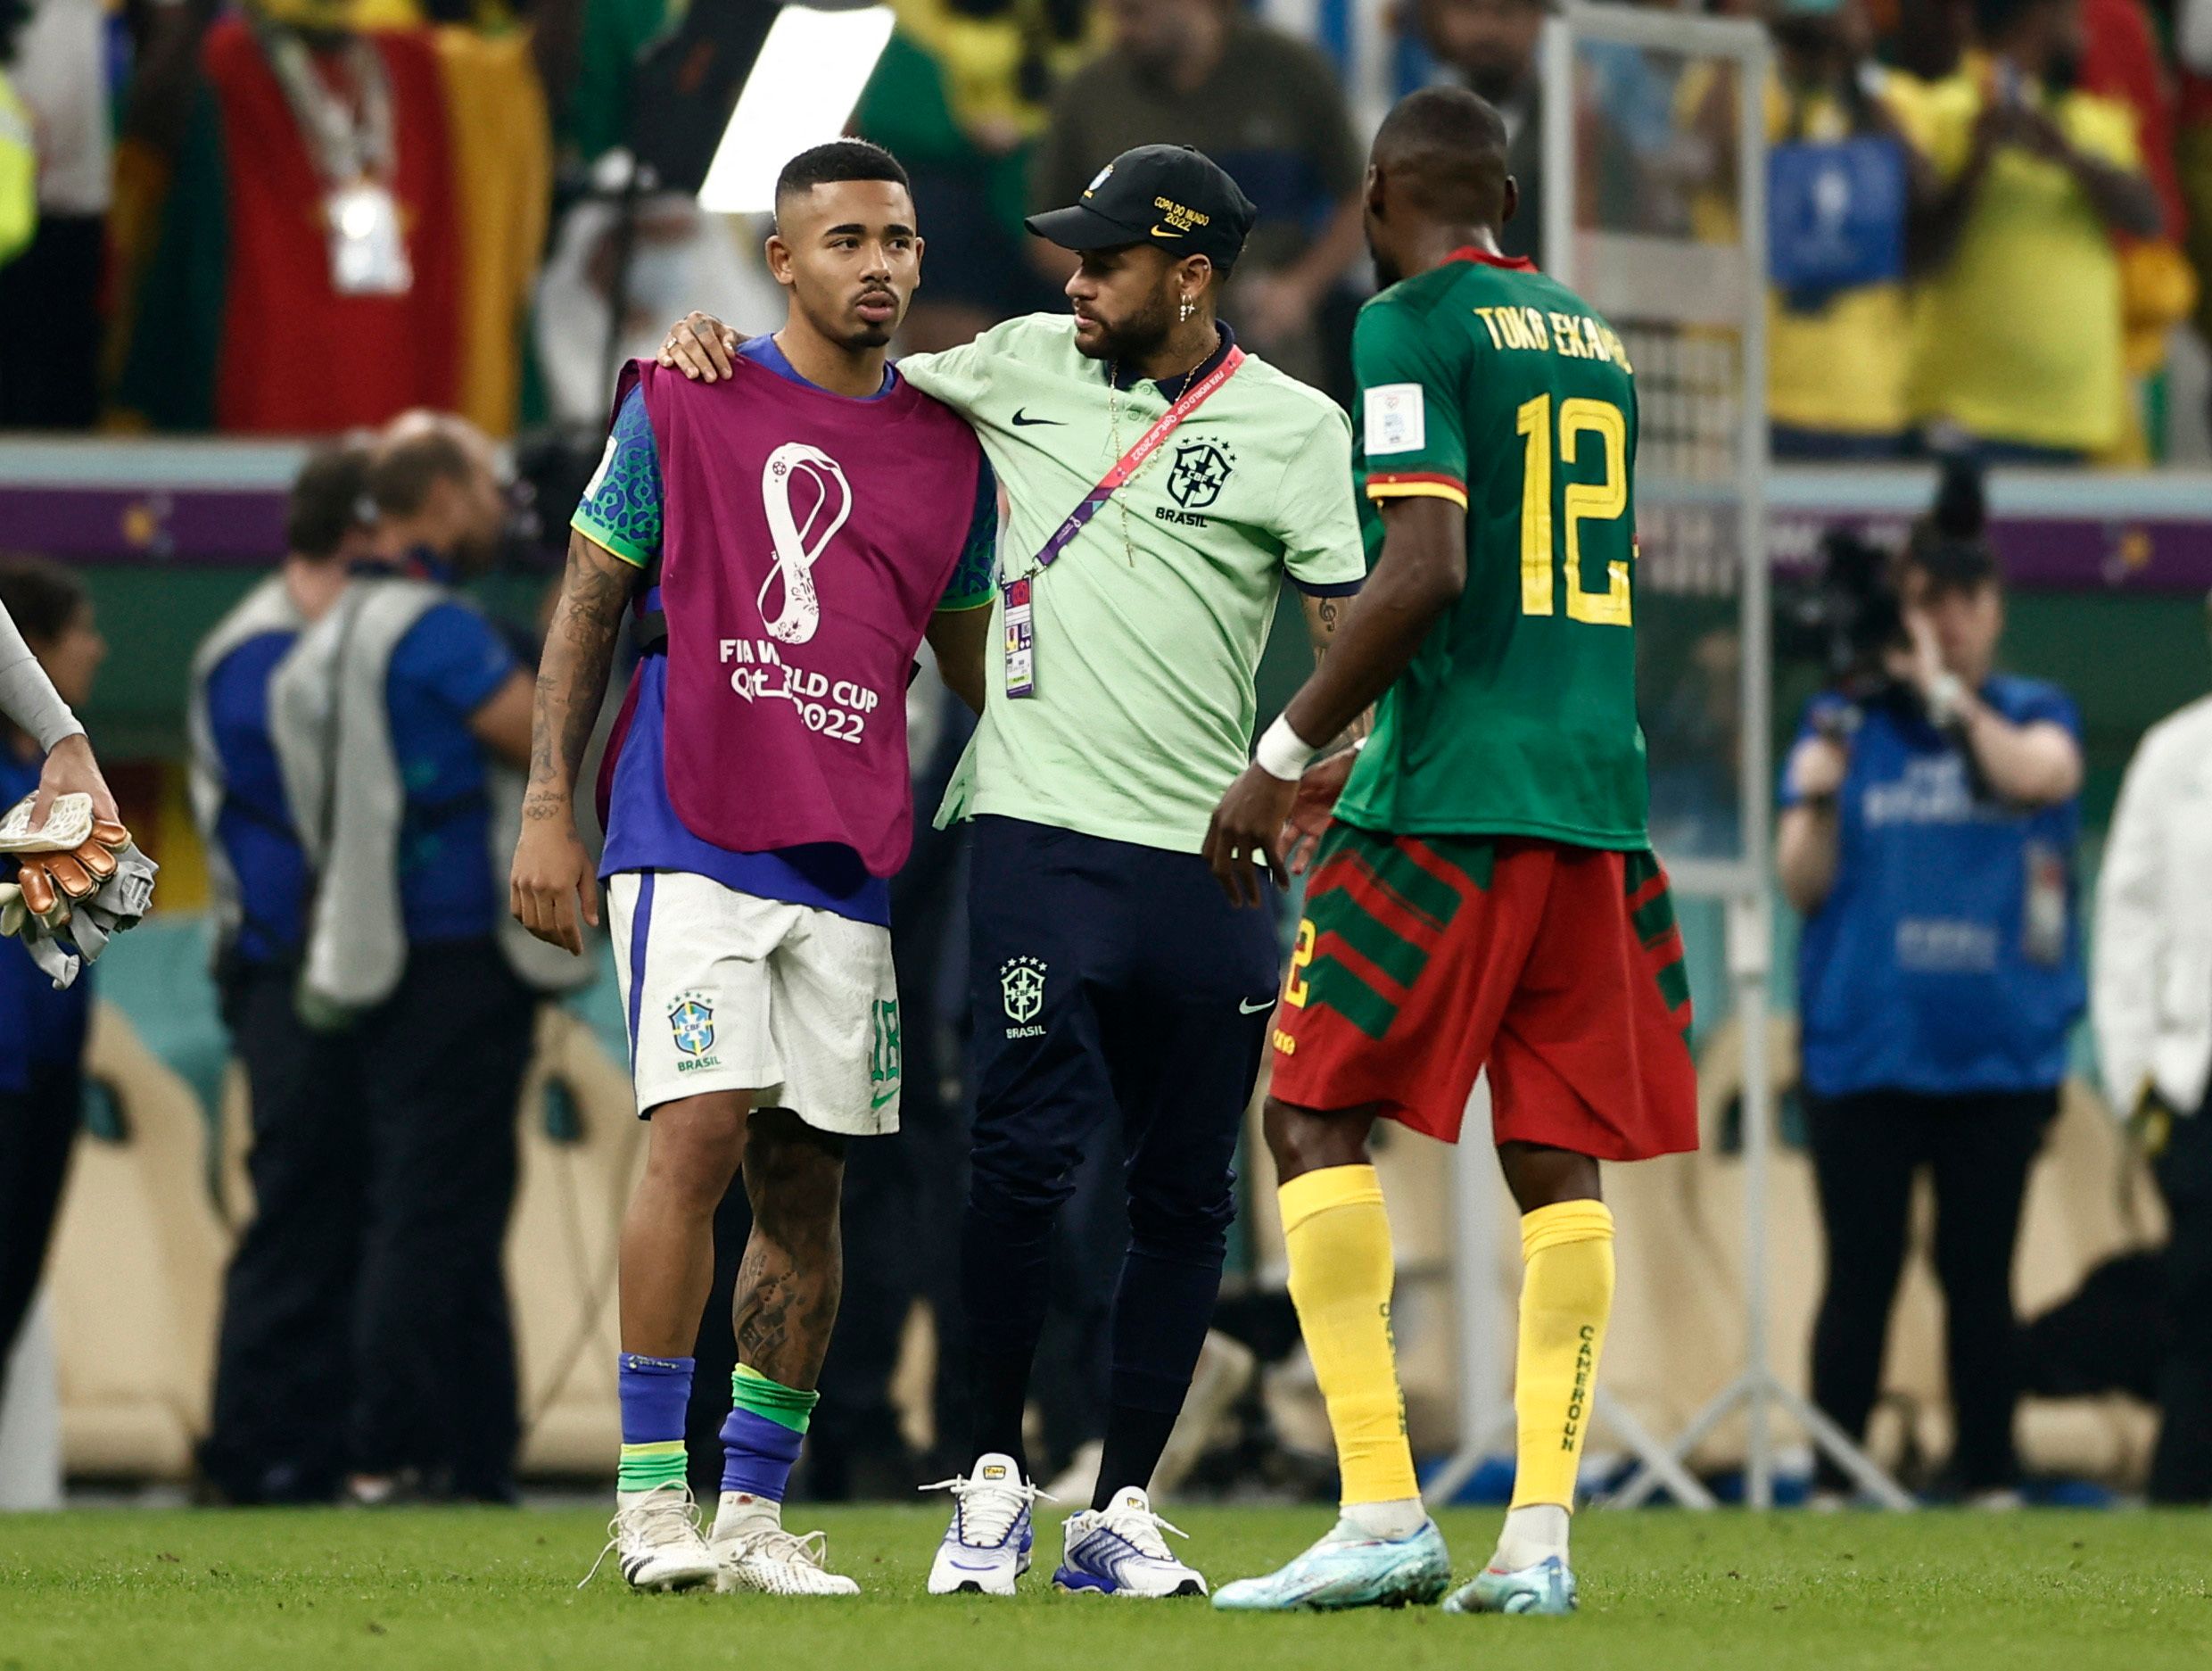 Arsenal: Gabriel Jesus “expected to return” in January -Arsenal News